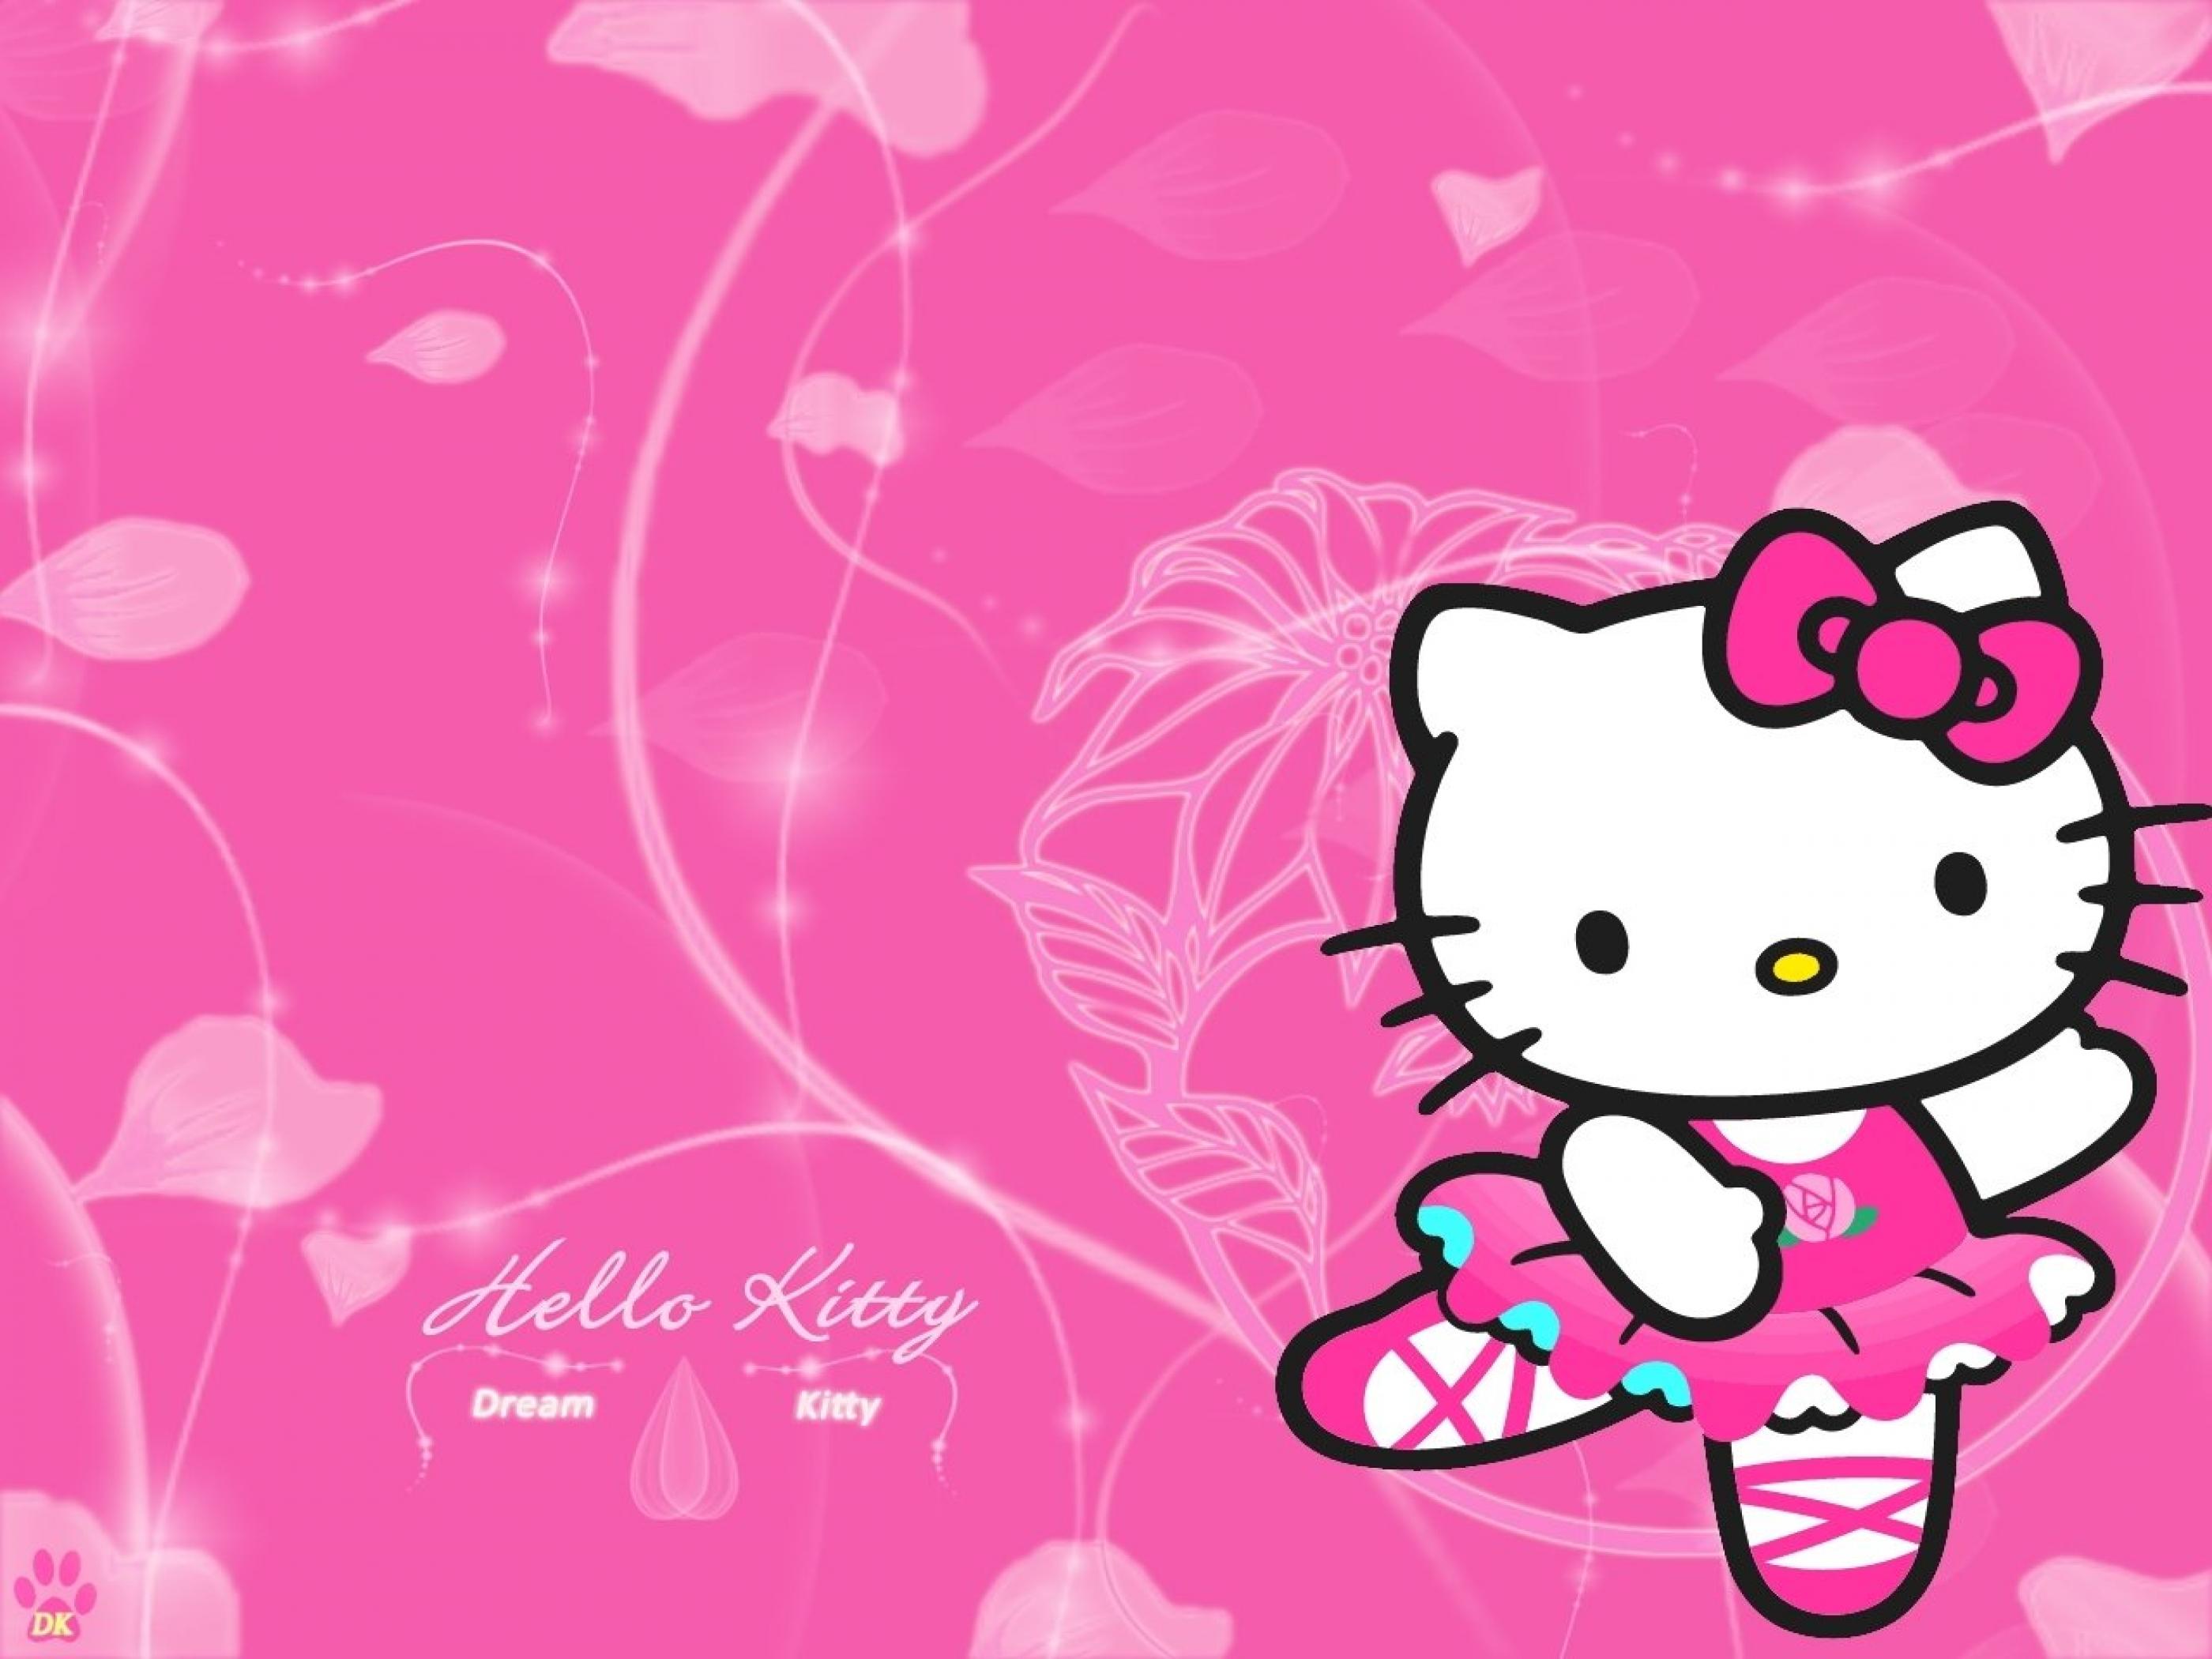 Download Wallpaper Hello Kitty 3d Image Num 91